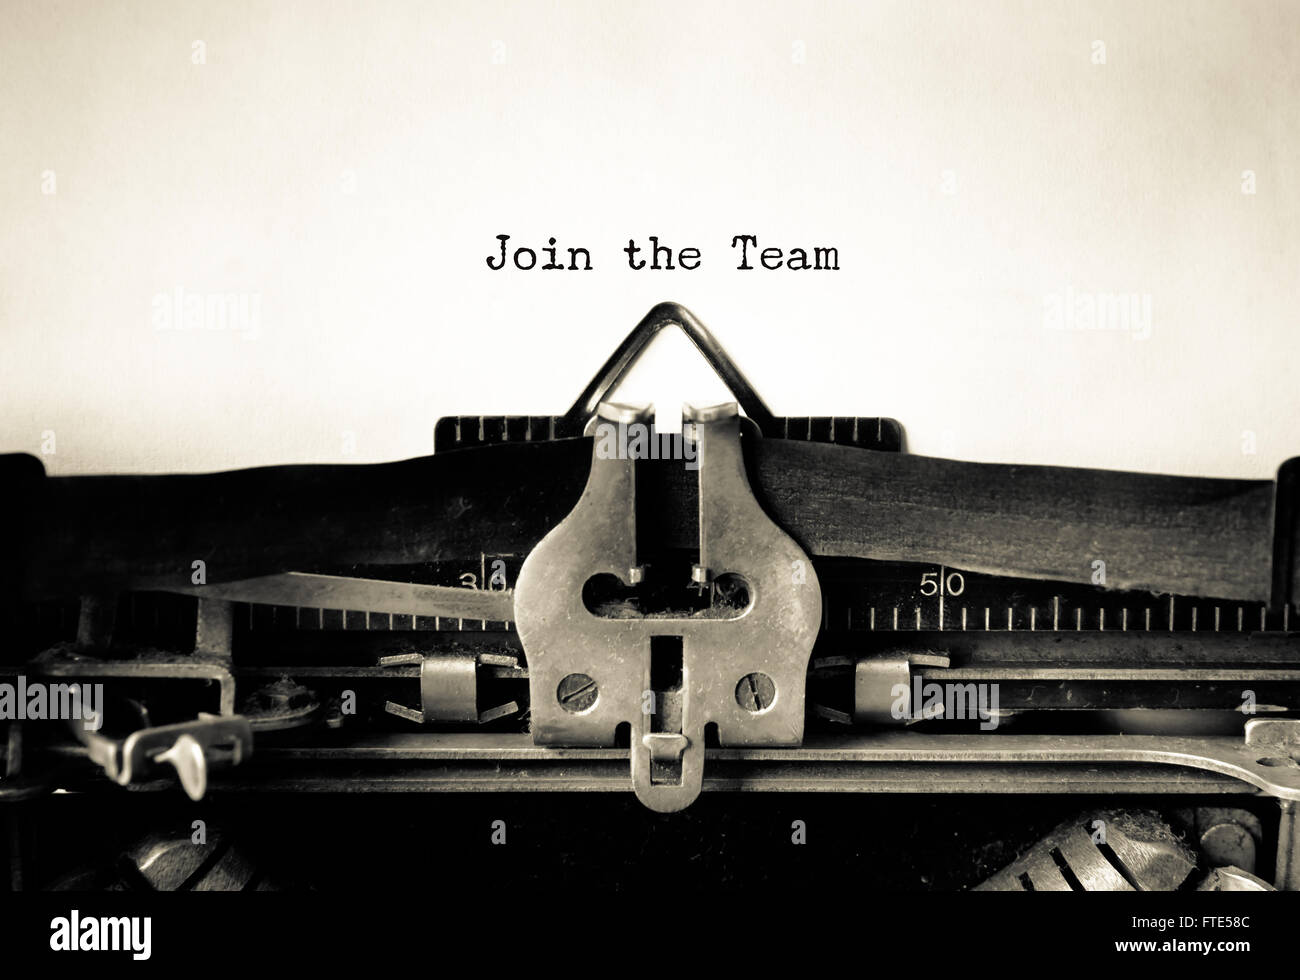 Join the team words typed on a Vintage Typewriter. Stock Photo